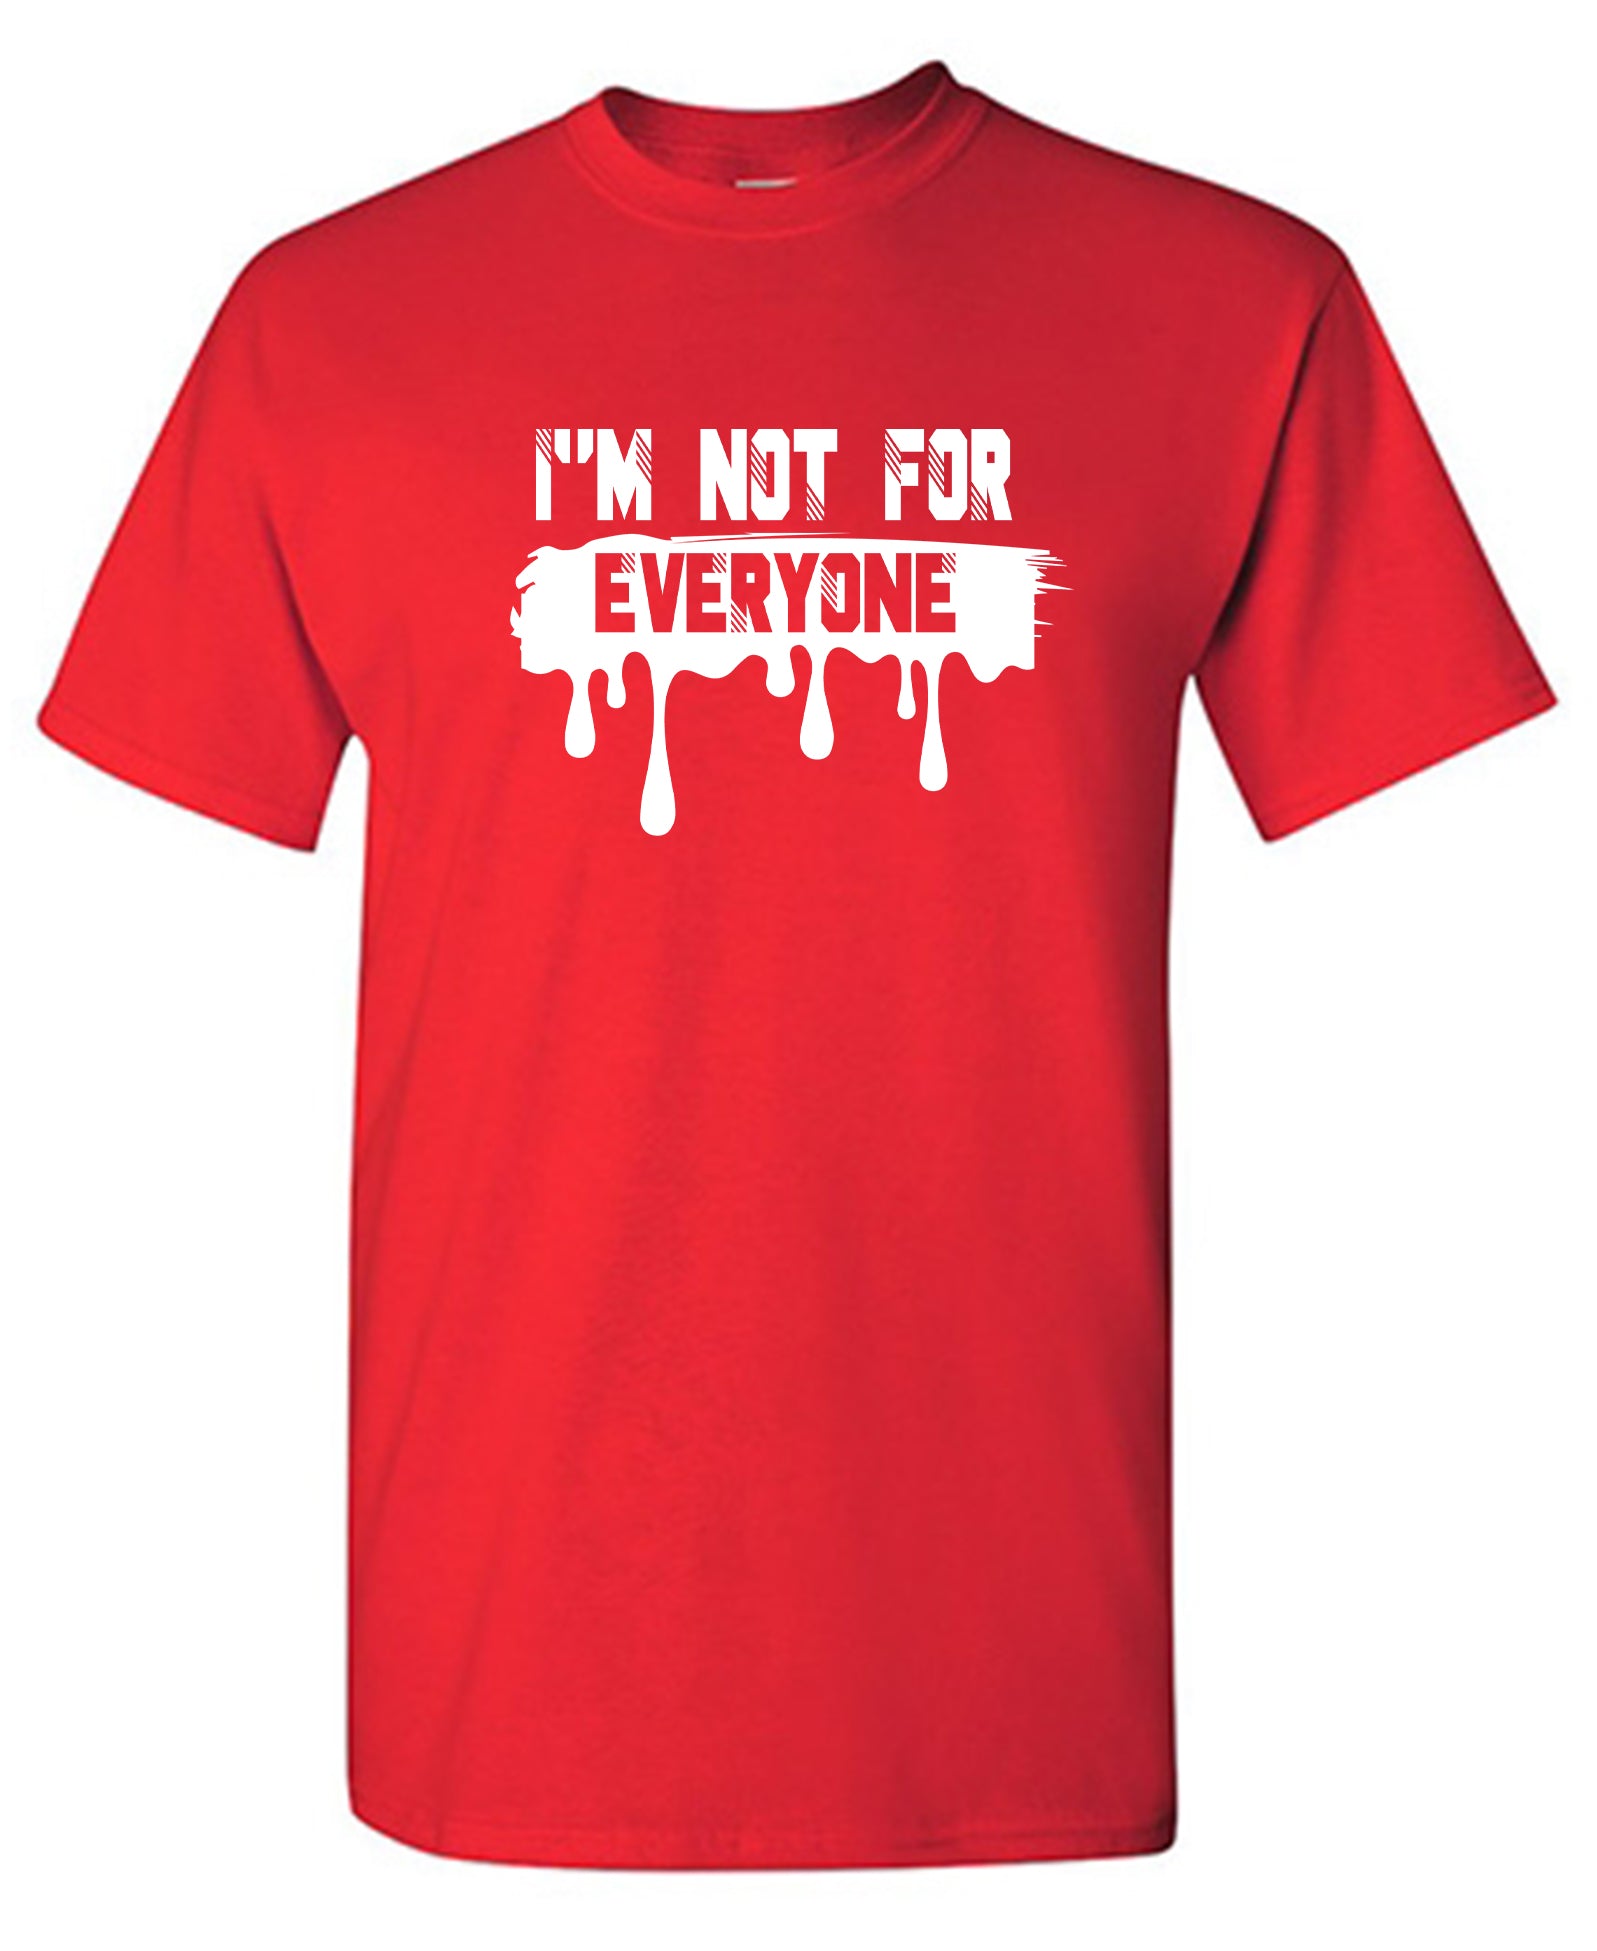 I'm Not For Everyone - Funny T Shirts & Graphic Tees